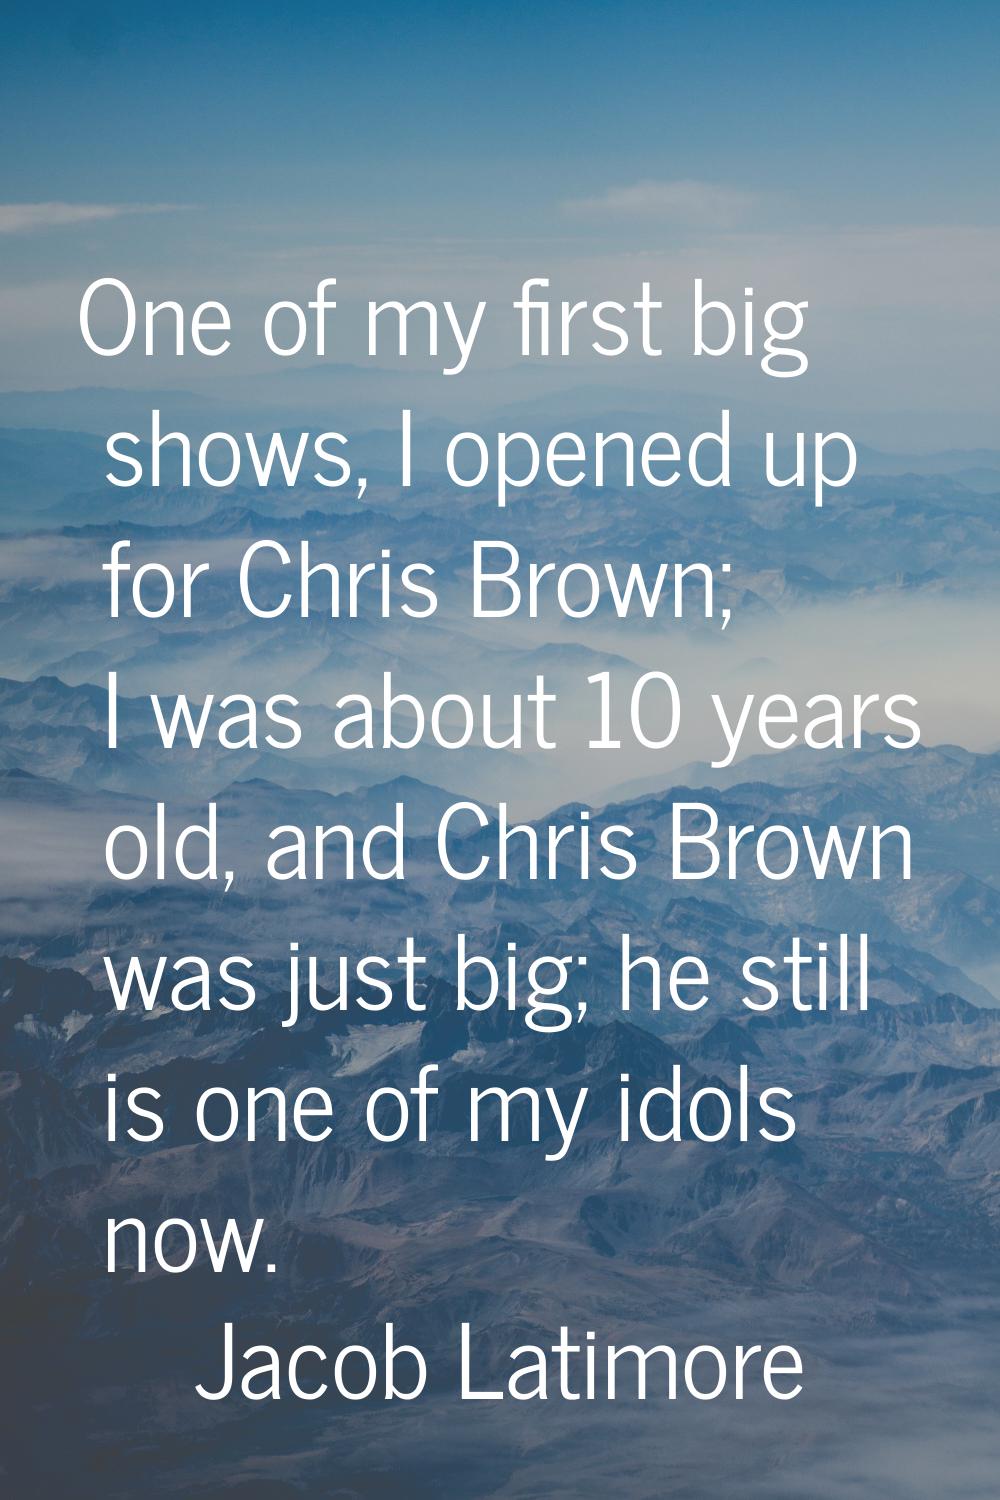 One of my first big shows, I opened up for Chris Brown; I was about 10 years old, and Chris Brown w